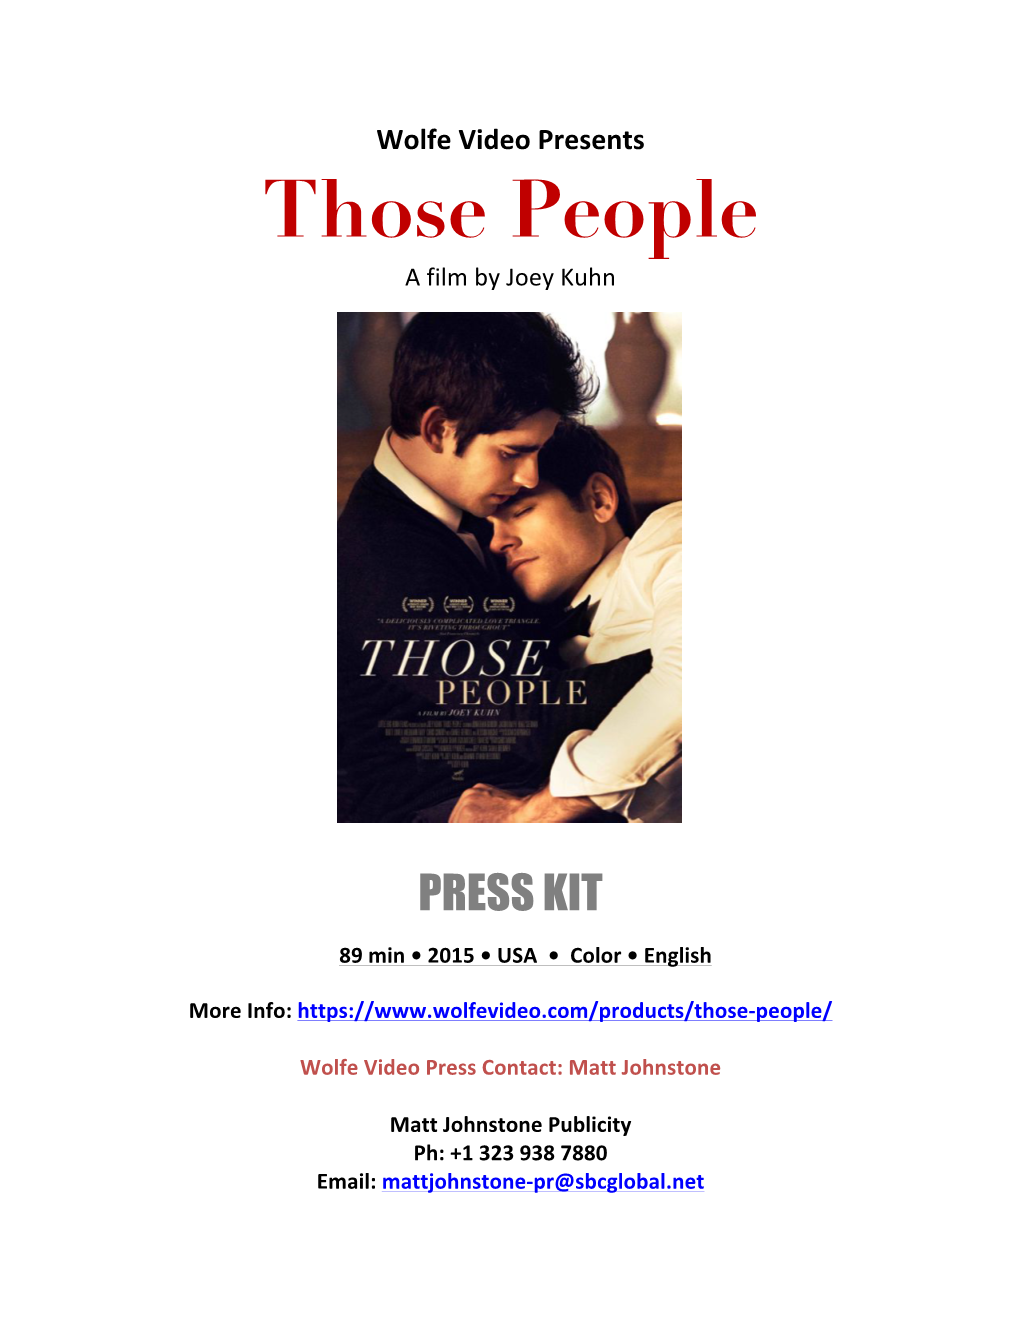 Wolfe Video Presents Those People a Film by Joey Kuhn